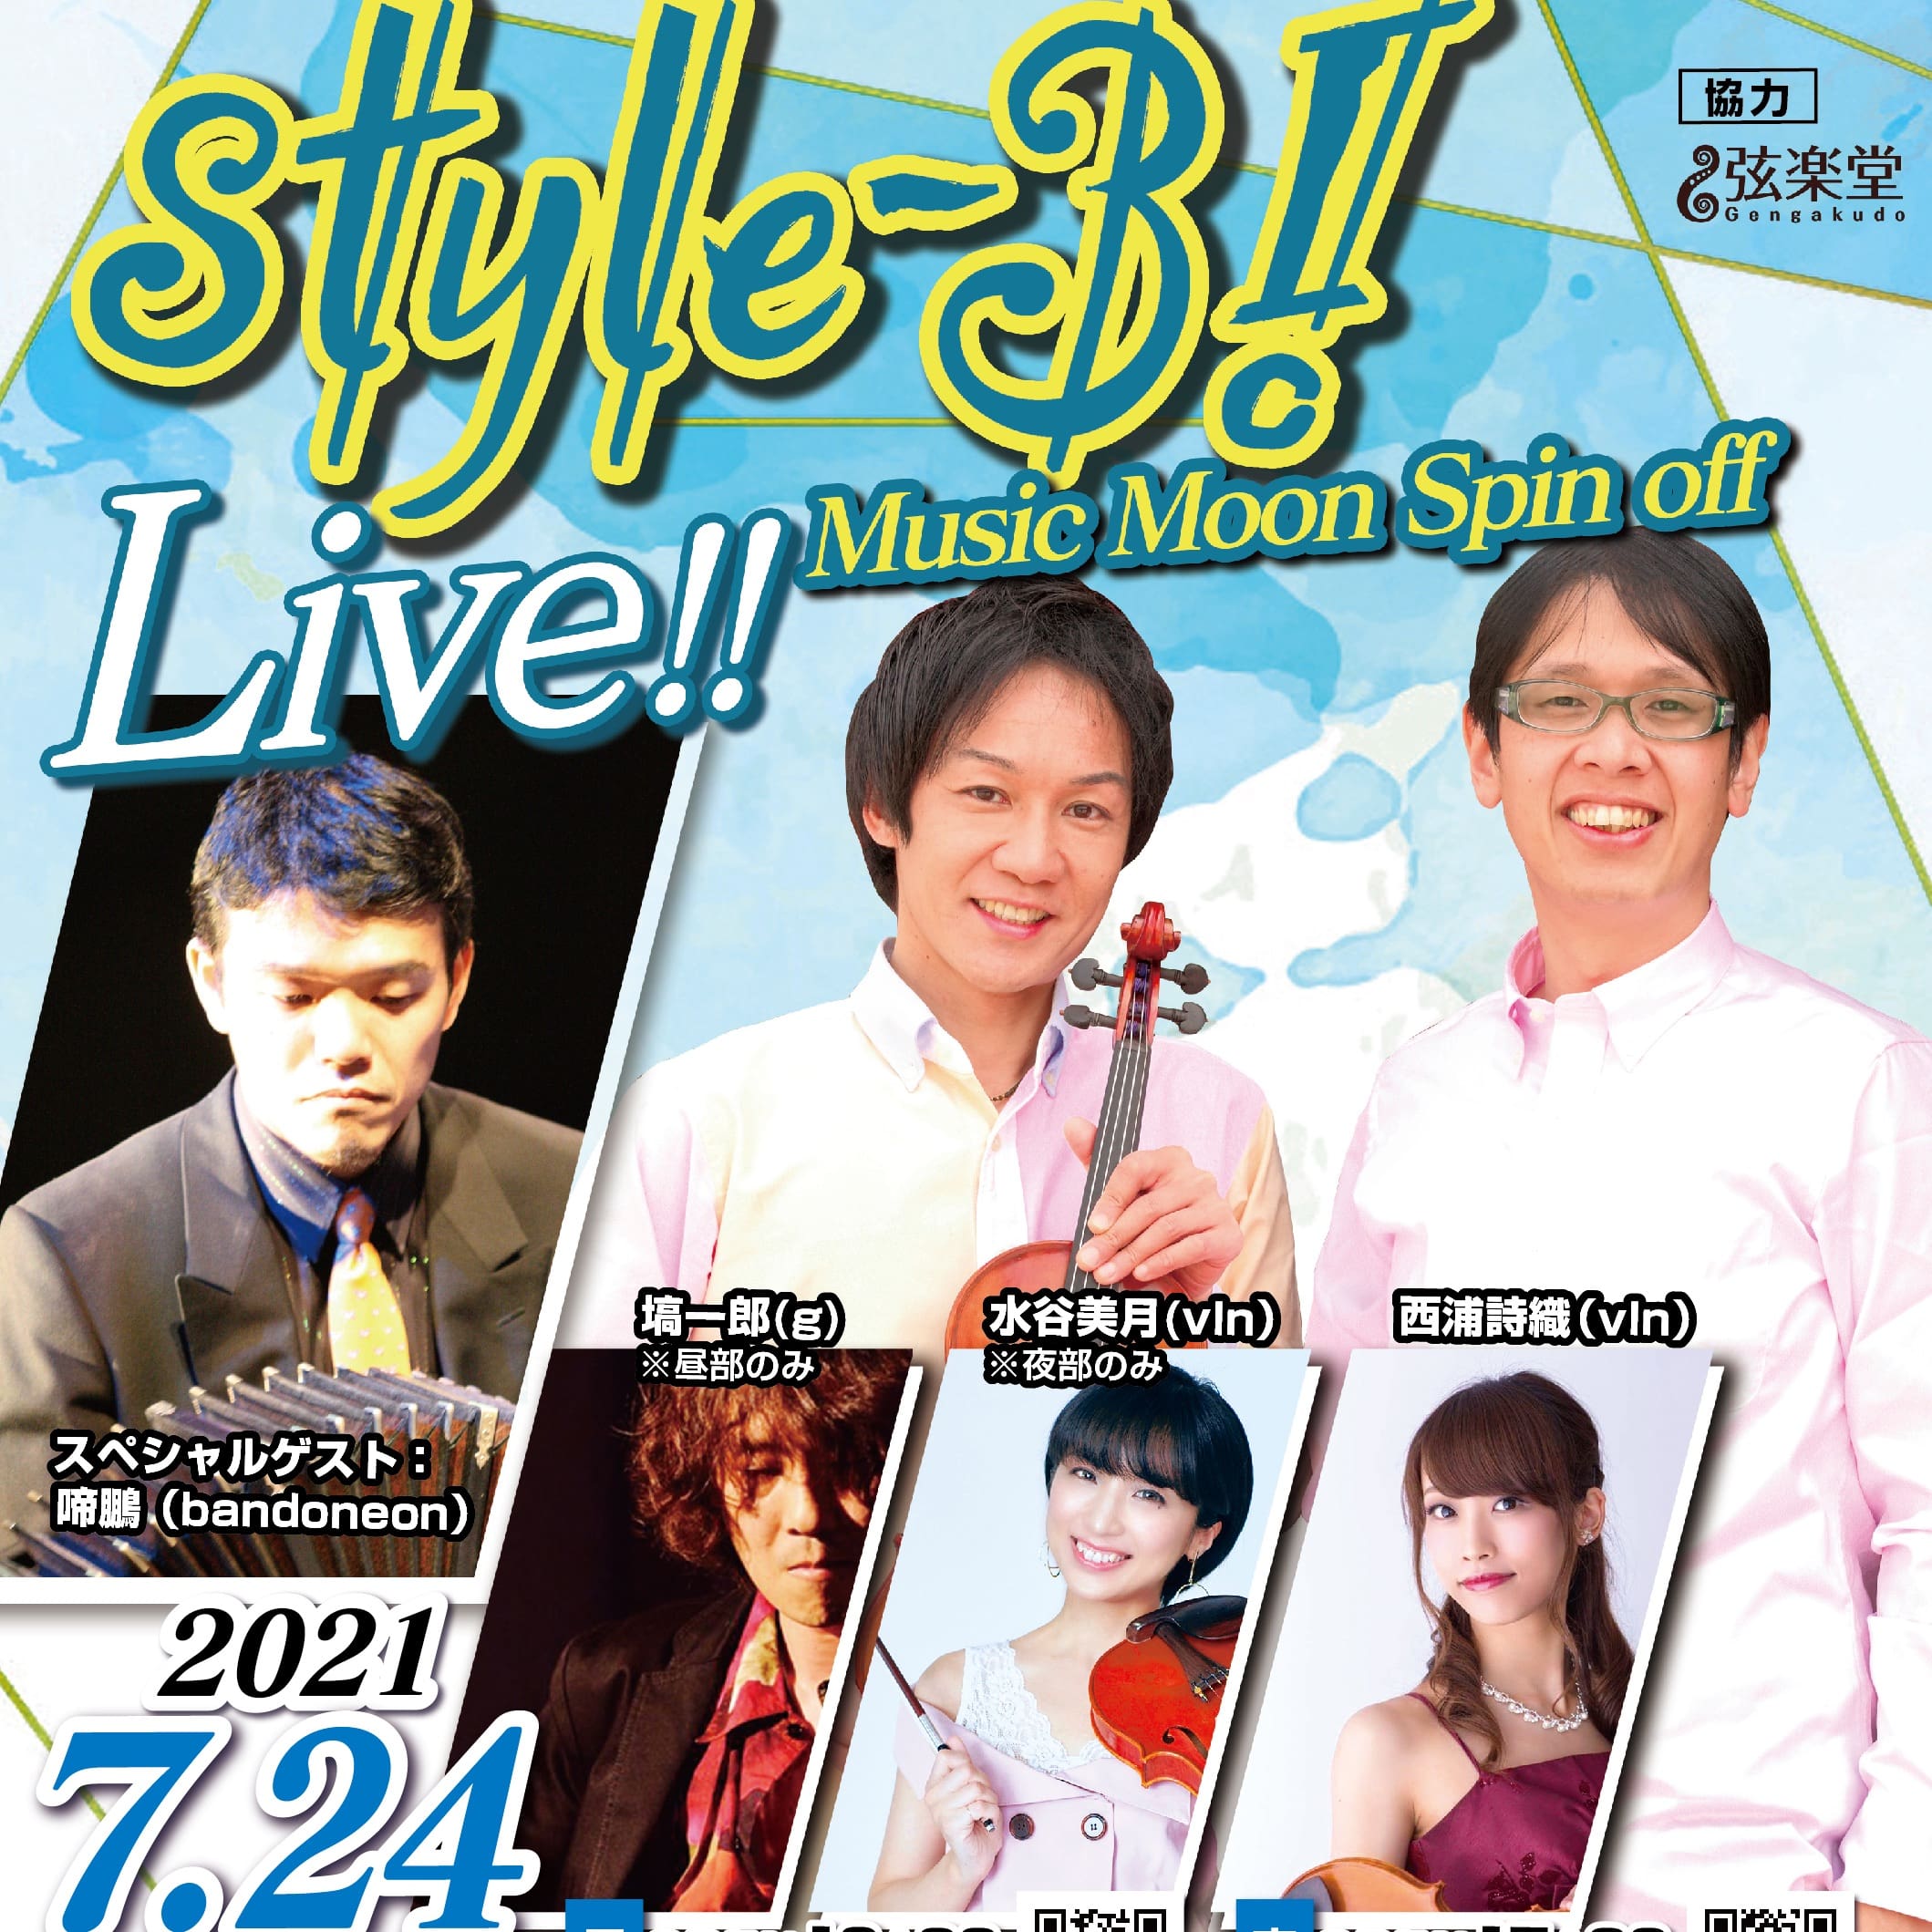 style-3!  Music Moon Spin off Live!!【夜部】